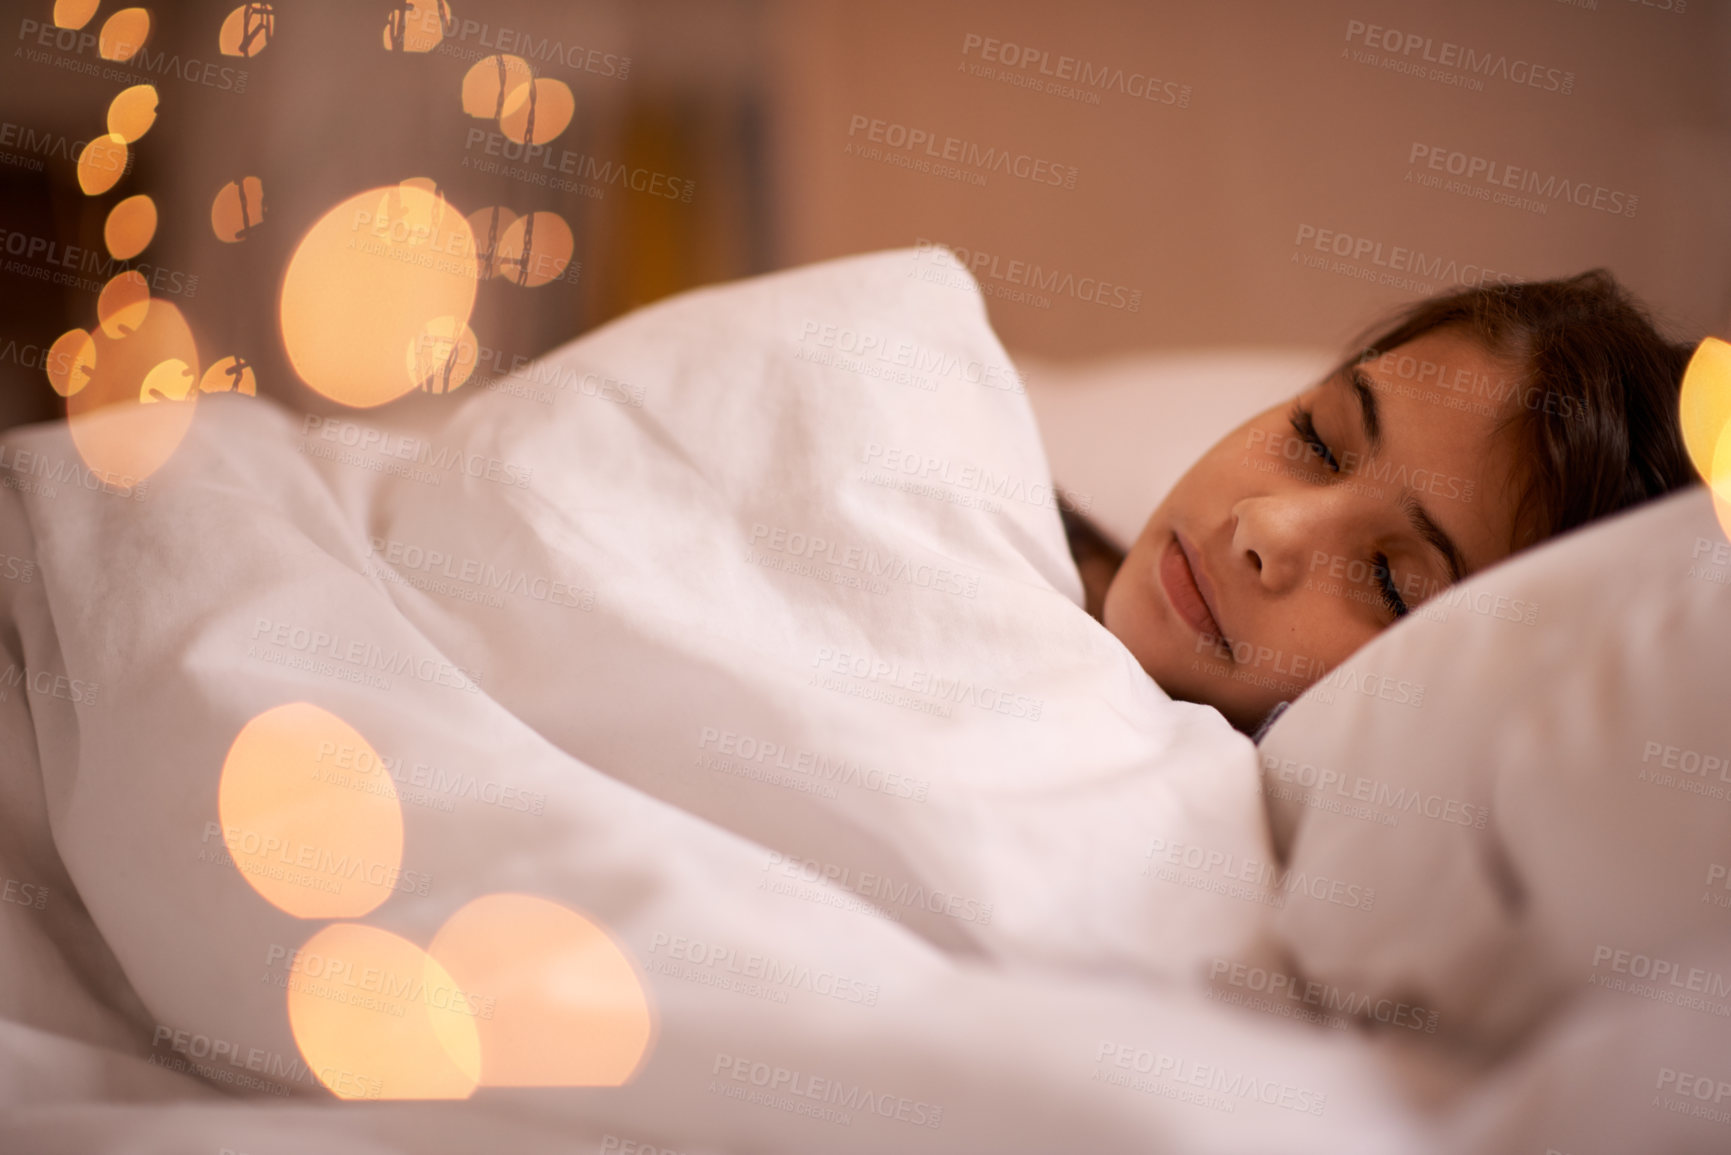 Buy stock photo Sleeping, peace and girl child relax in a bed with comfort, dreaming or resting at home. Sleep, dream or calm female kid person in a bedroom for vacation, holiday or nighttime quiet snooze in a house